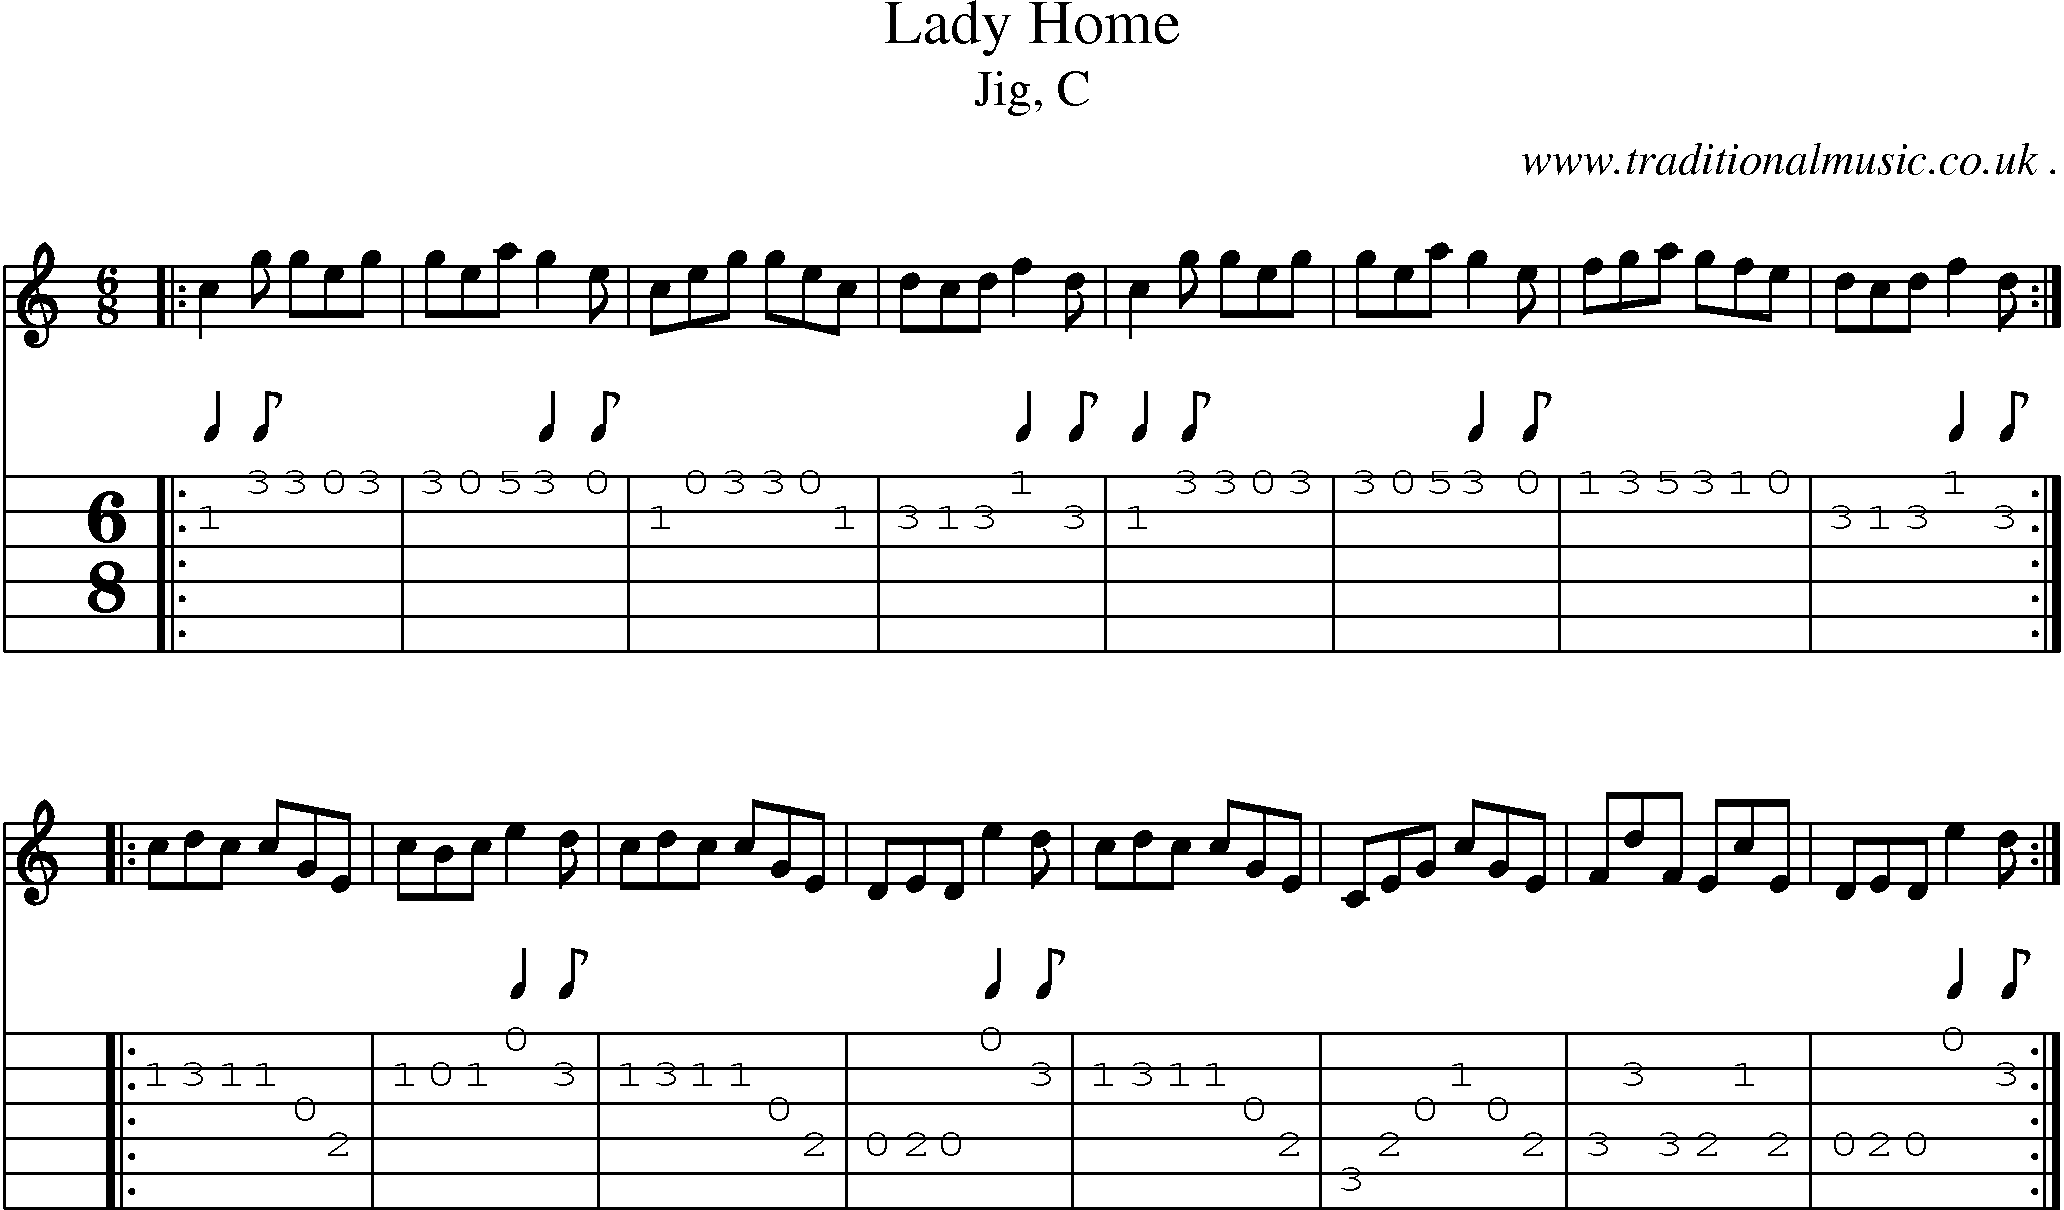 Sheet-music  score, Chords and Guitar Tabs for Lady Home